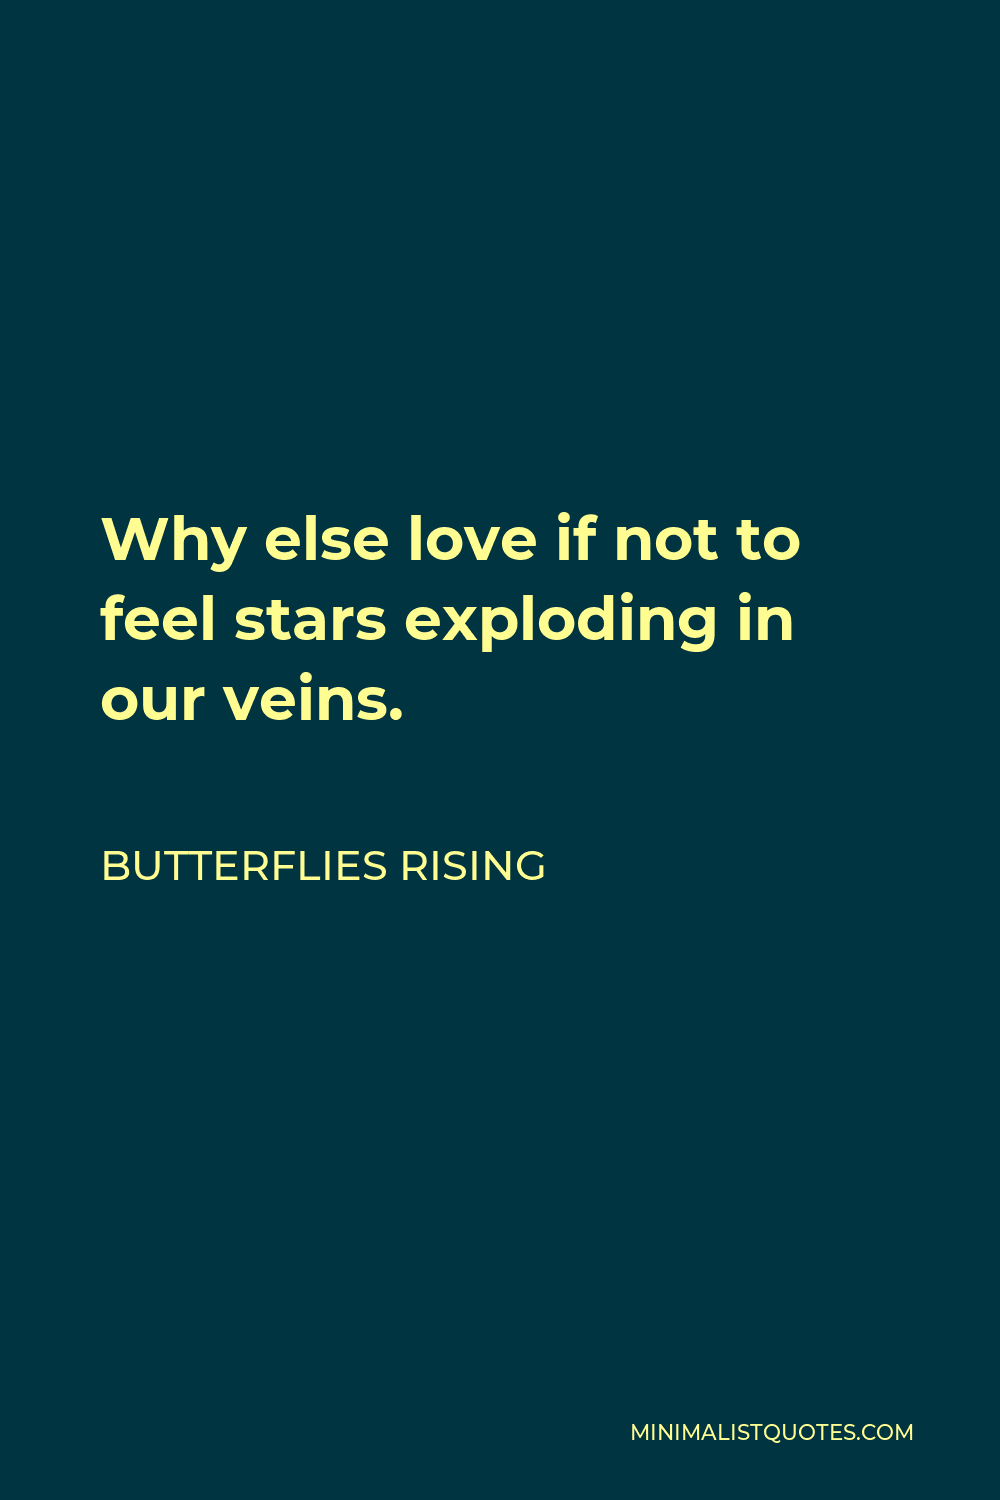 Butterflies Rising Quote - Why else love if not to feel stars exploding in our veins.